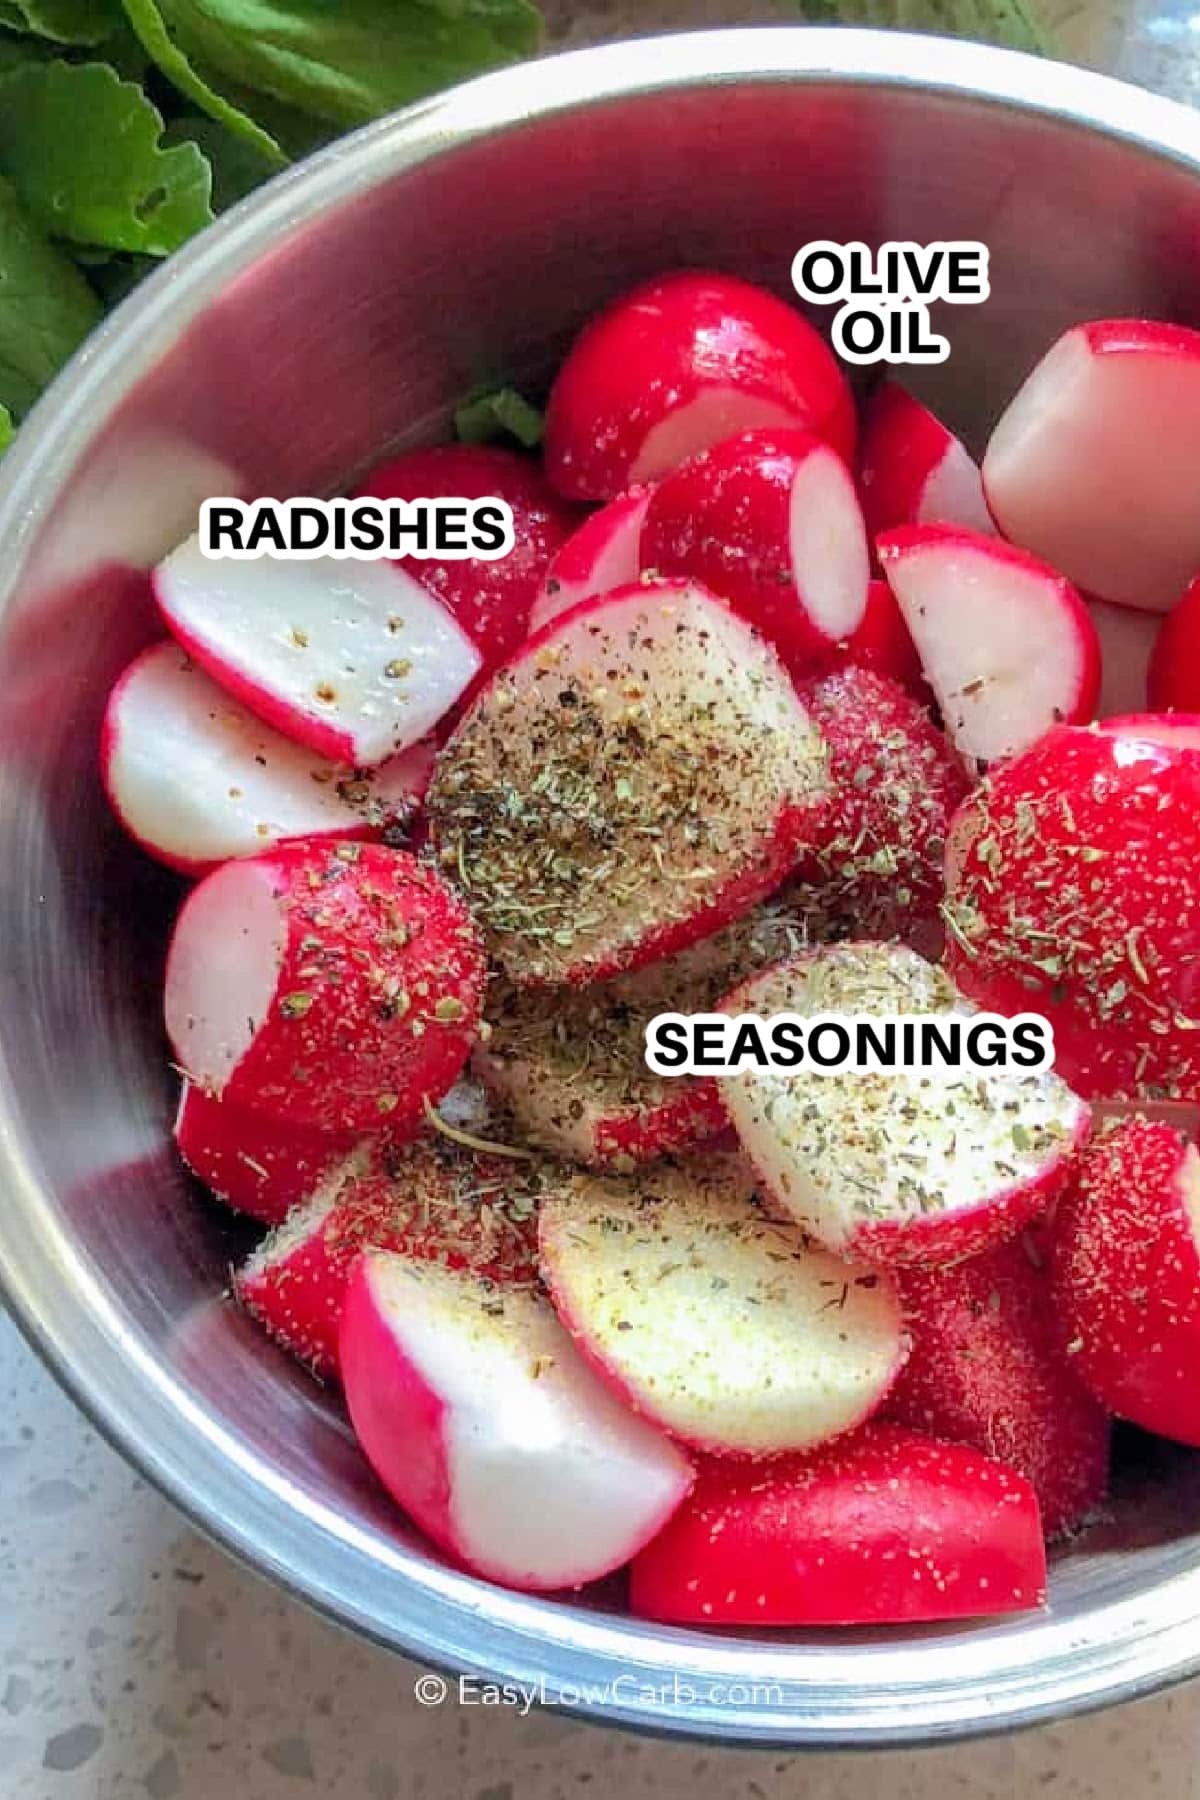 raw radishes, olive oil, and seasonings in a silver bowl